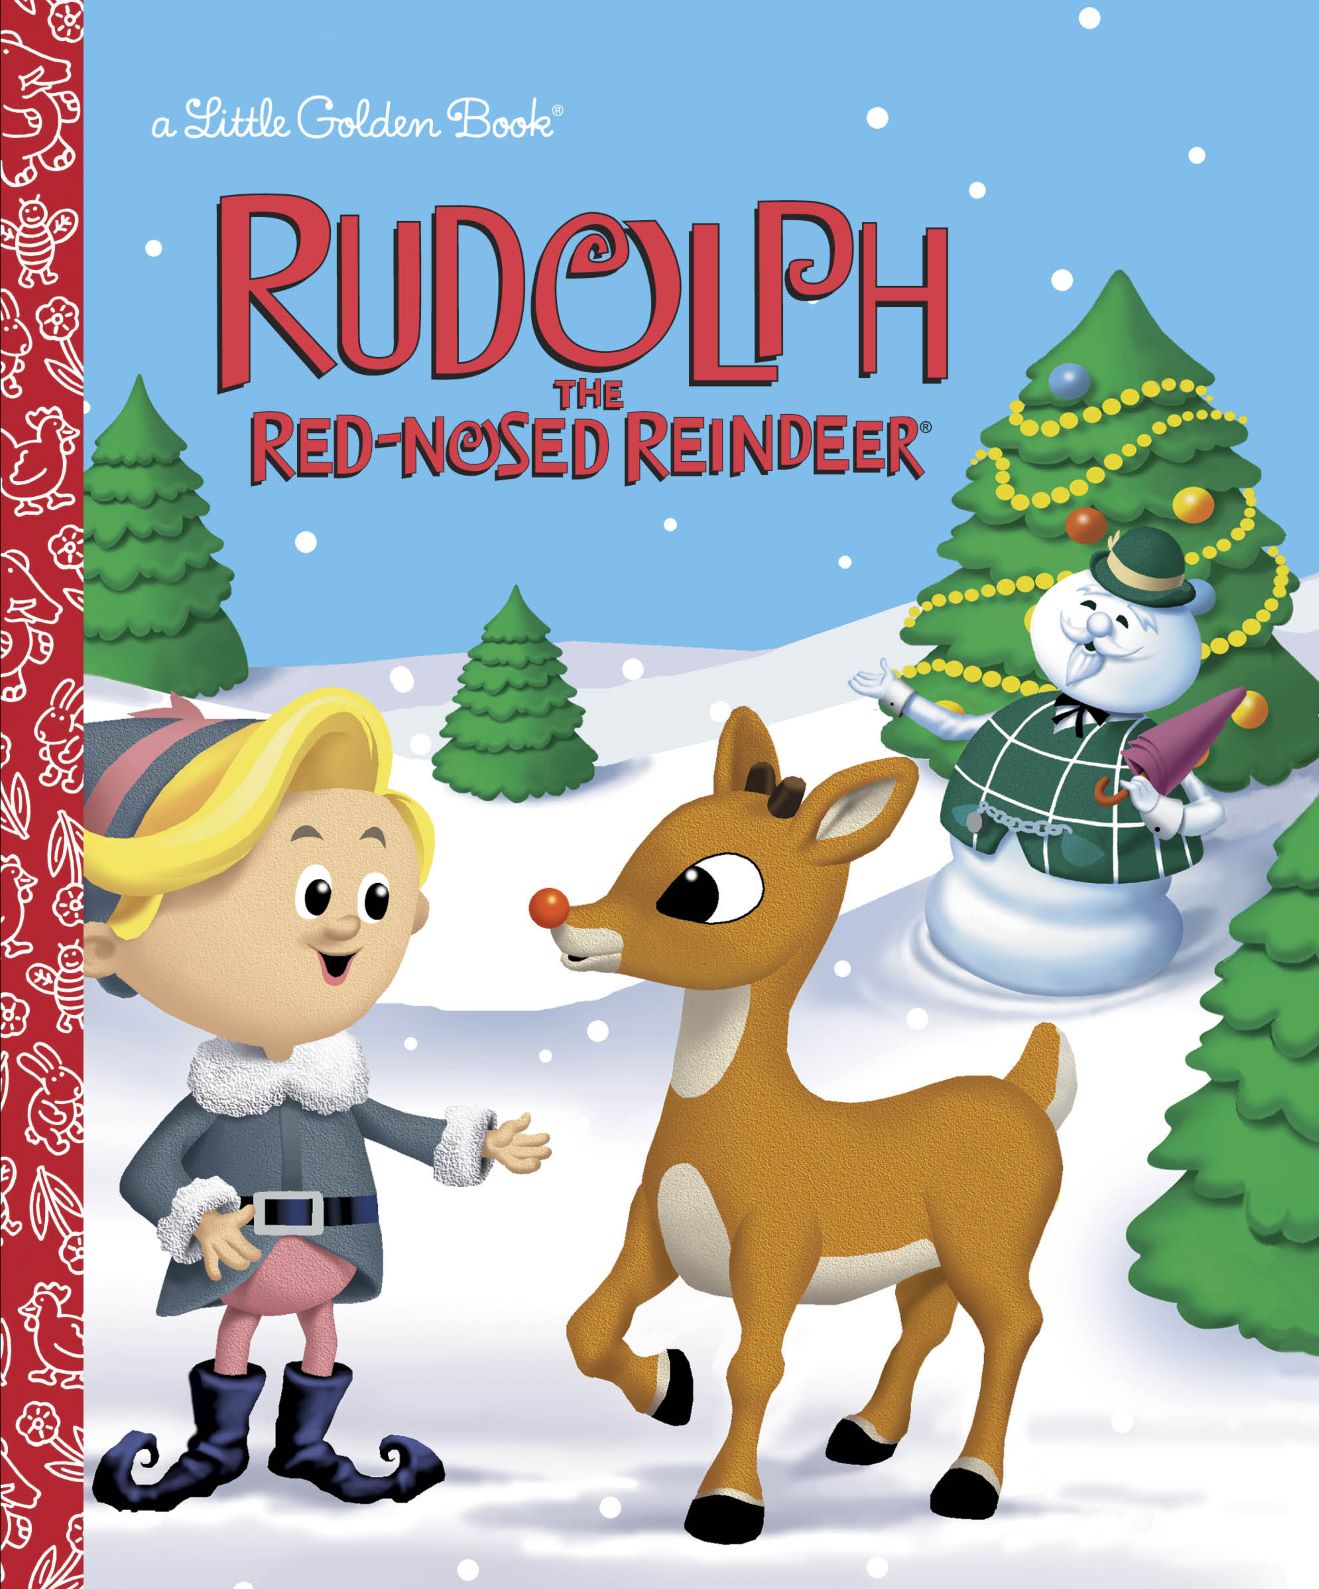 Rudolph The Red-Nosed Reindeer Golden Book